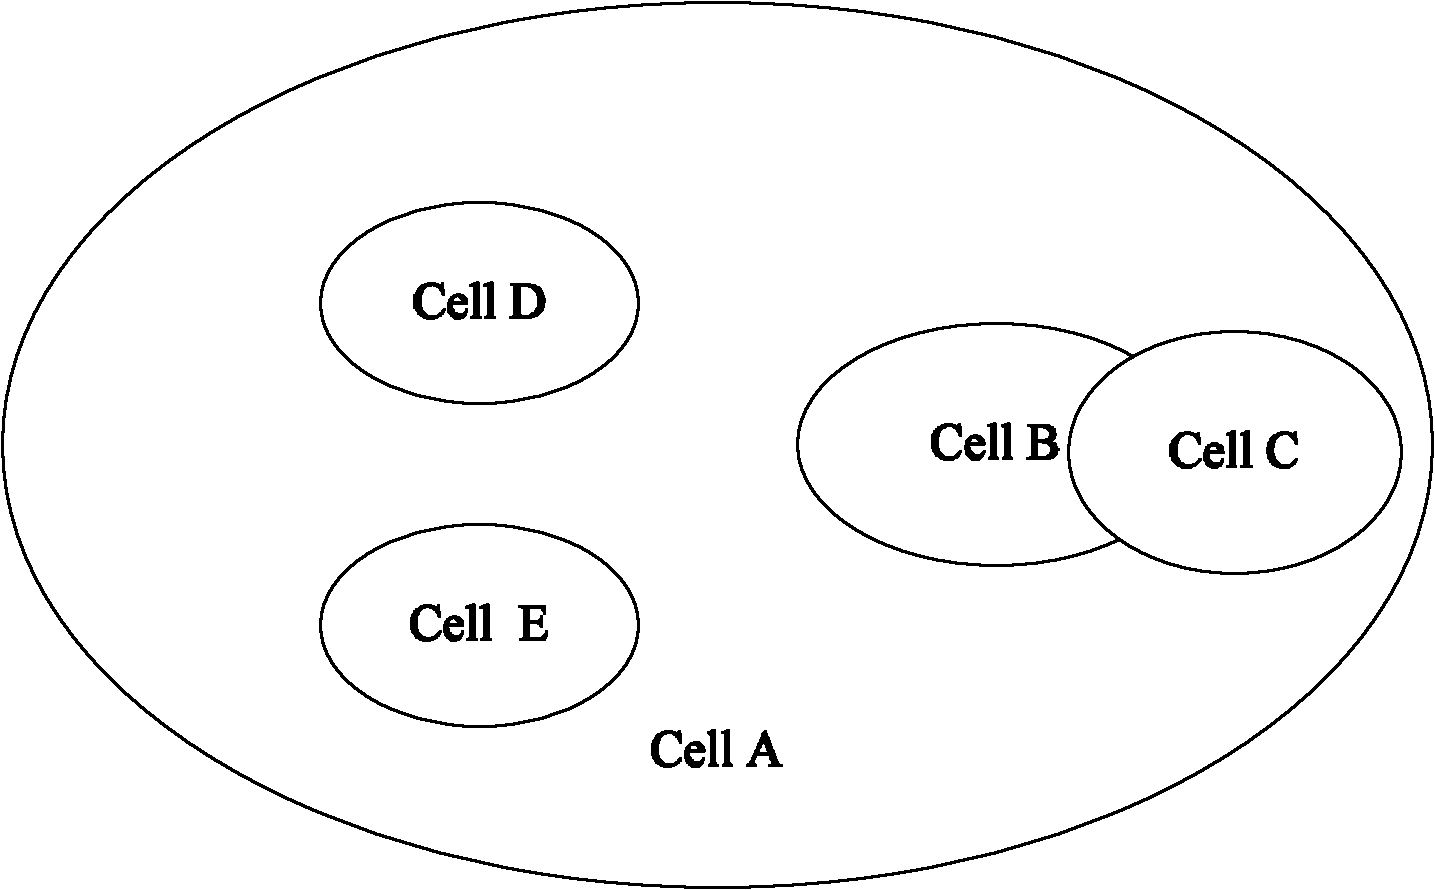 Energy-saving strategy under multi-cell overlapping and covering